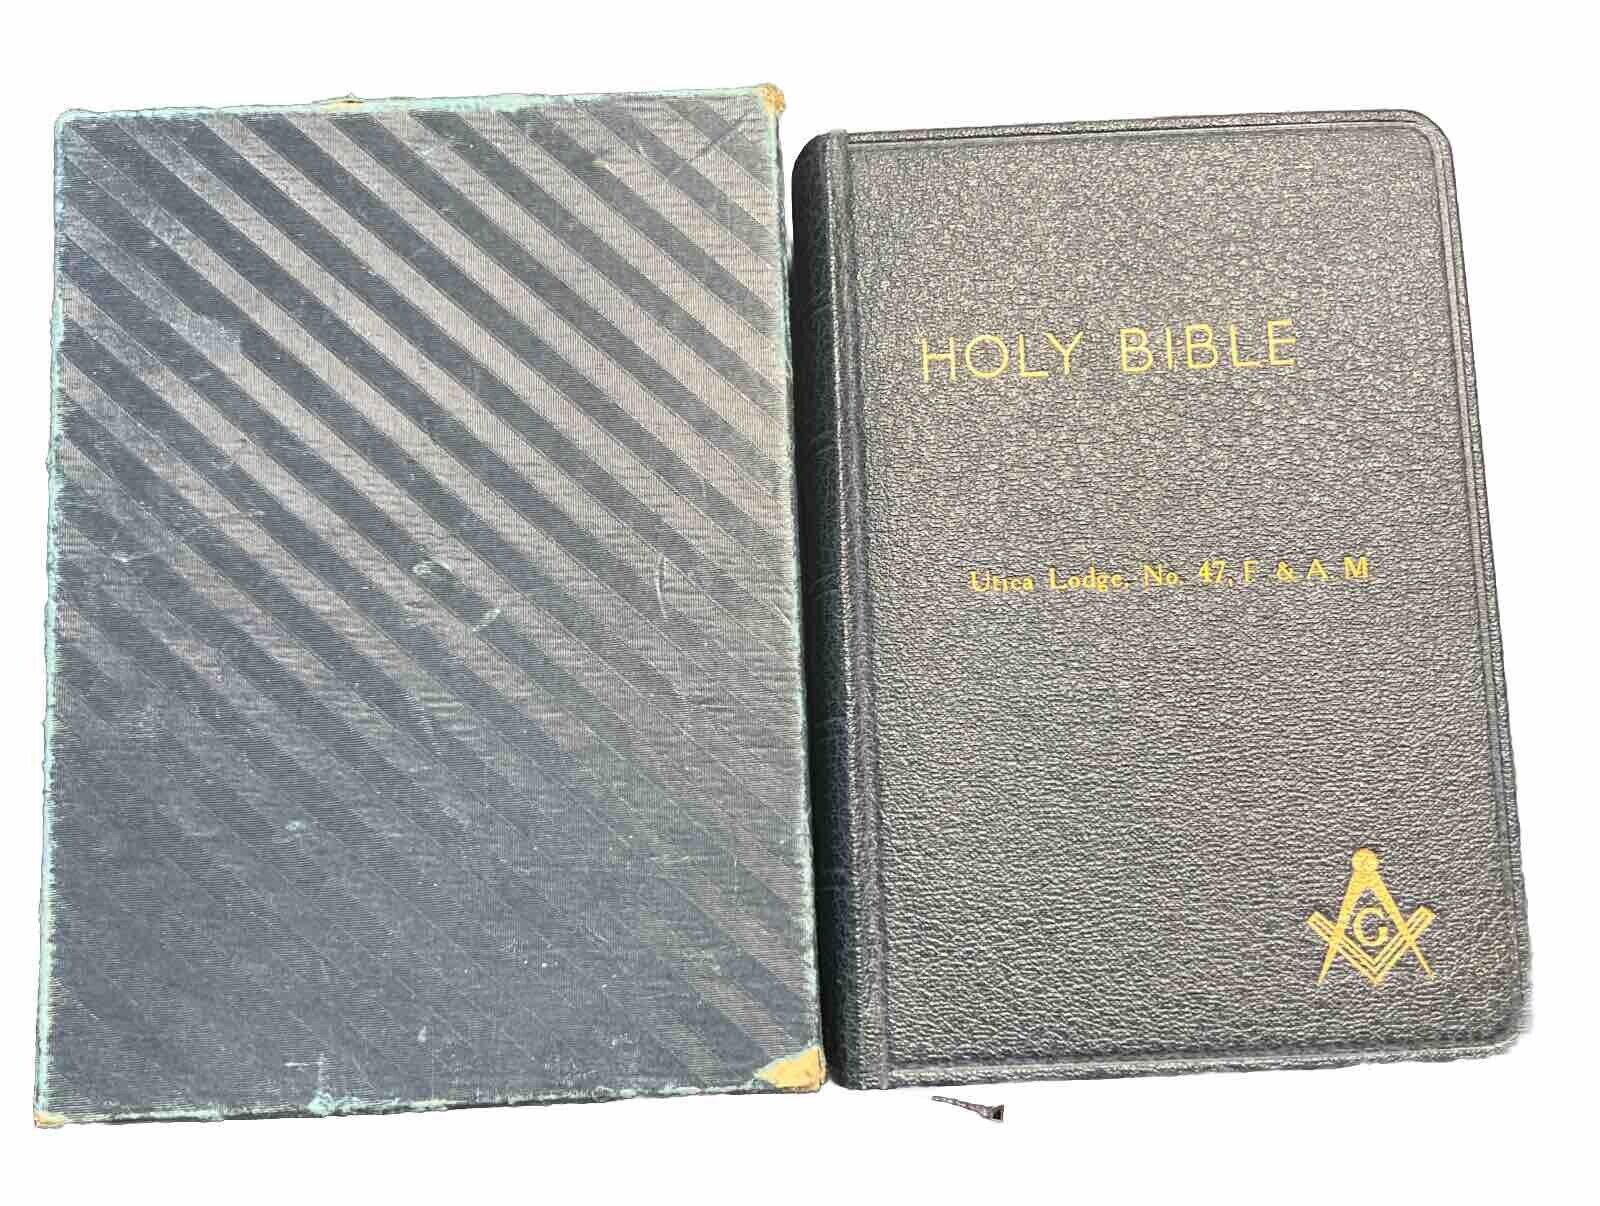 Oxford Bible for Masons, With Masonic Helps New york Edition No. 33 1928